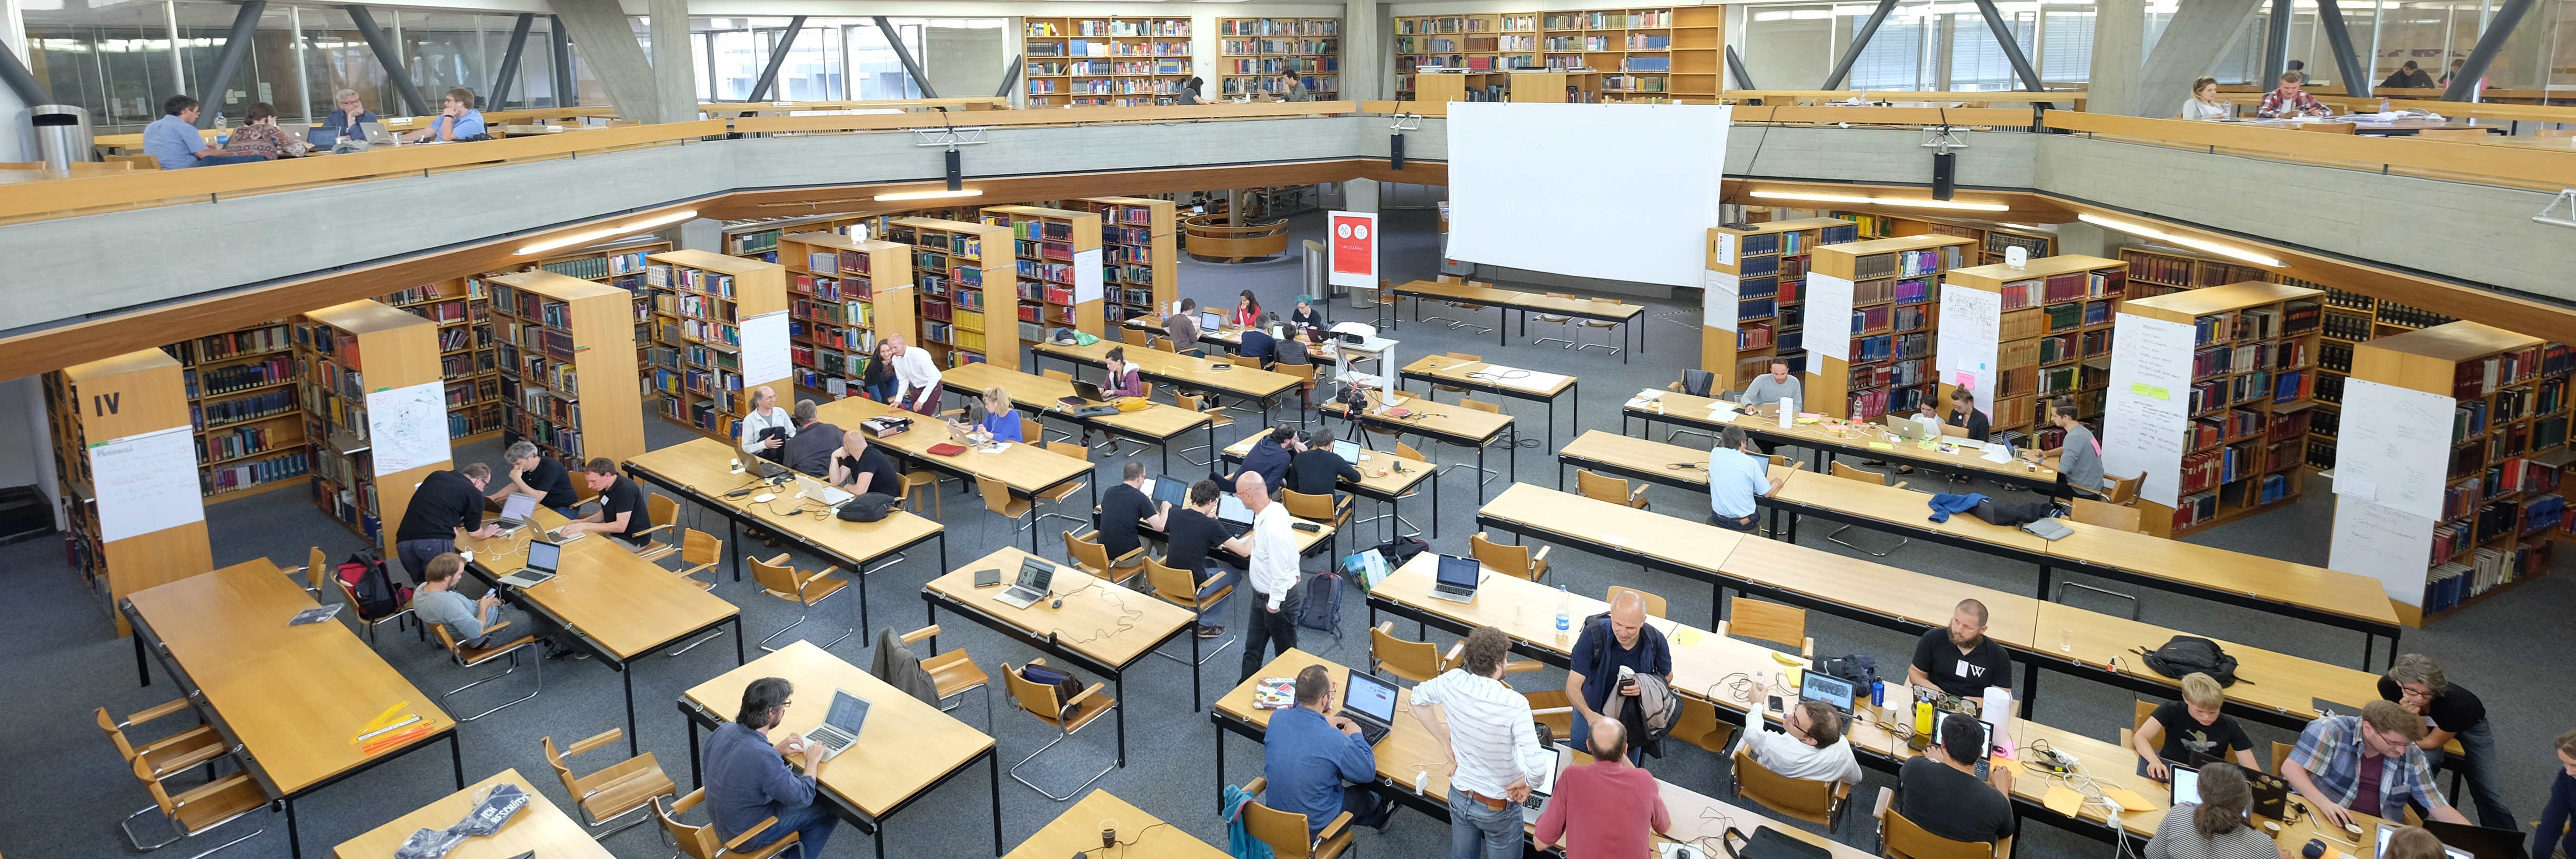 Swiss Open Cultural Data Hackathon 2016 at the Basel University Library. Photo by M. Schwendener, Commons